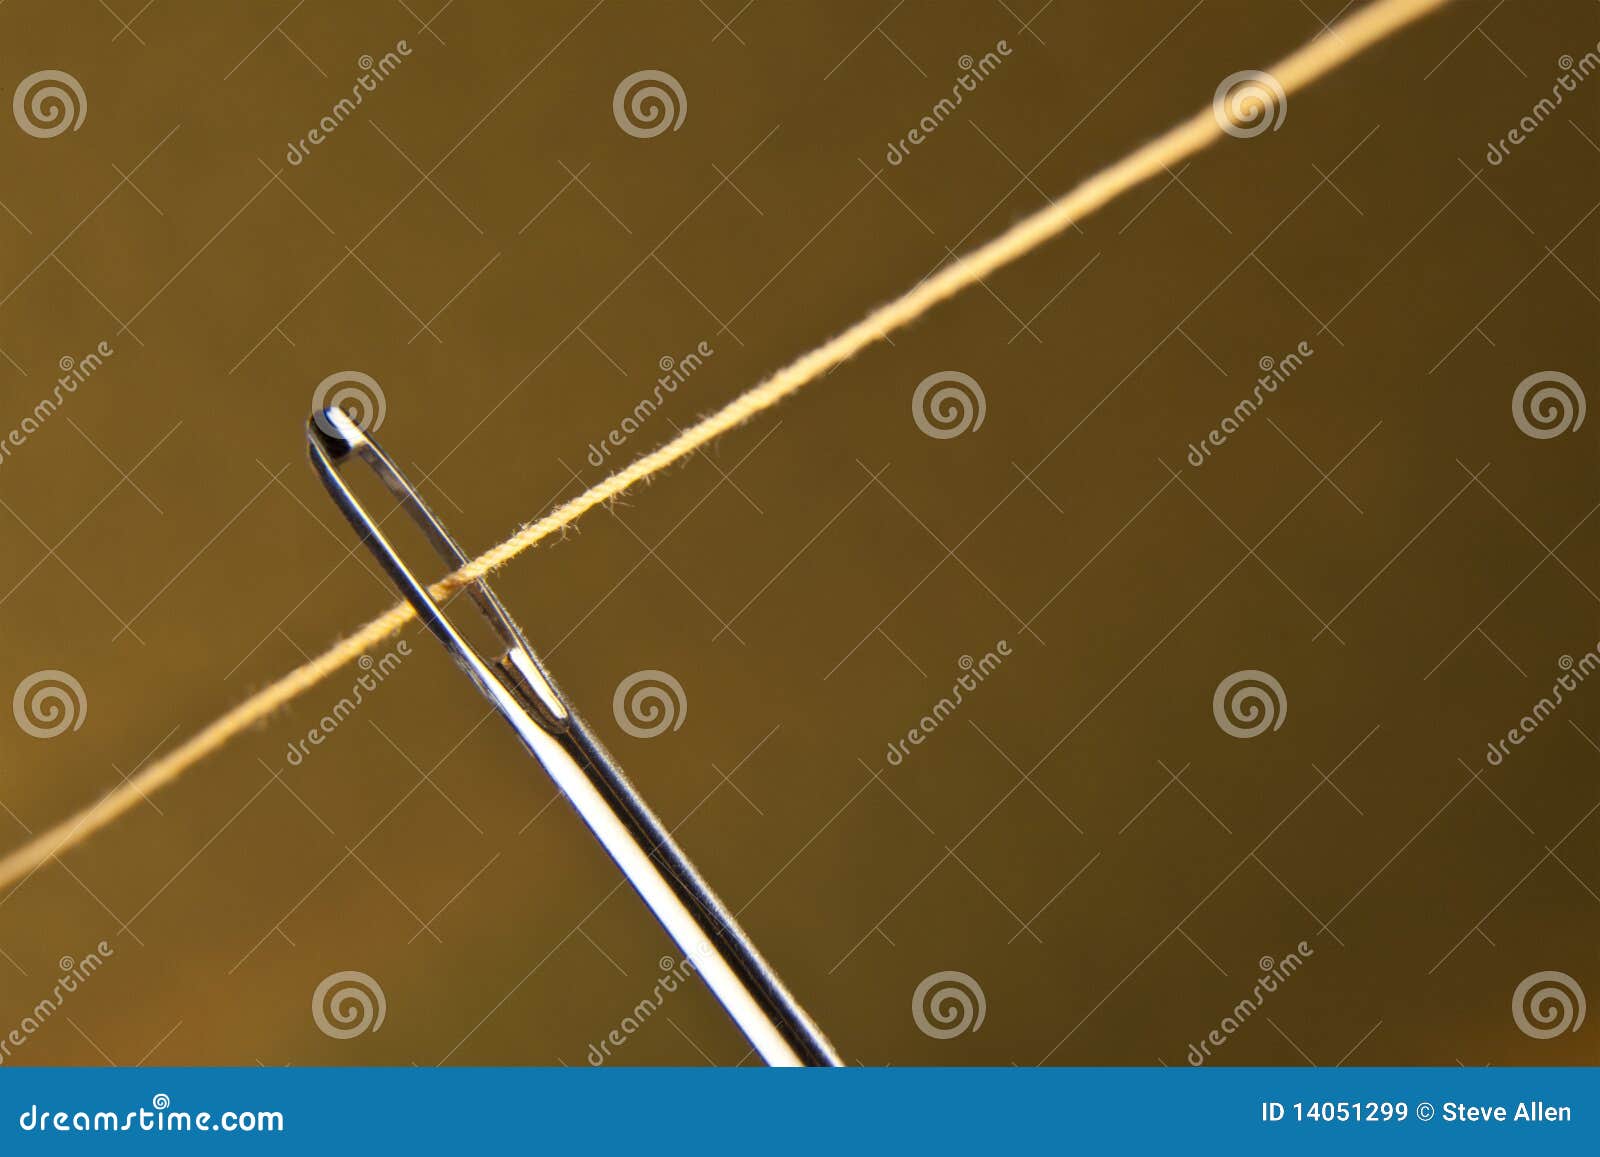 Sewing - Needle and Thread stock image. Image of intricate - 14051299